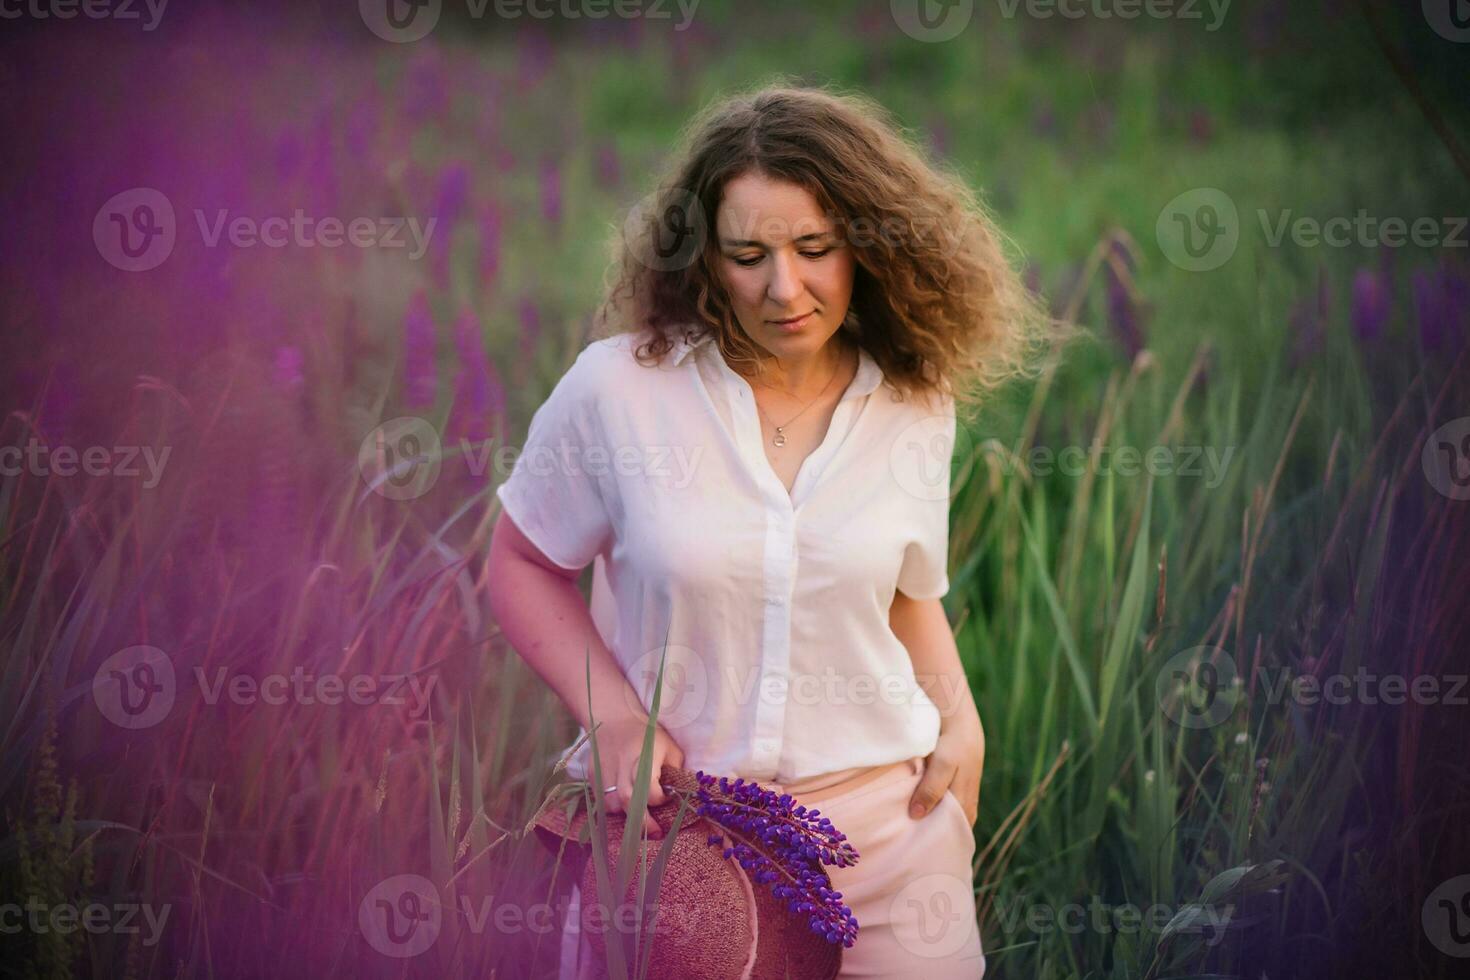 Young woman stands in white shirt in field of purple and pink lupins. Beautiful young woman with curly hair and hat outdoors on a meadow, lupins blossom. Sunset or sunrise, bright evening light photo